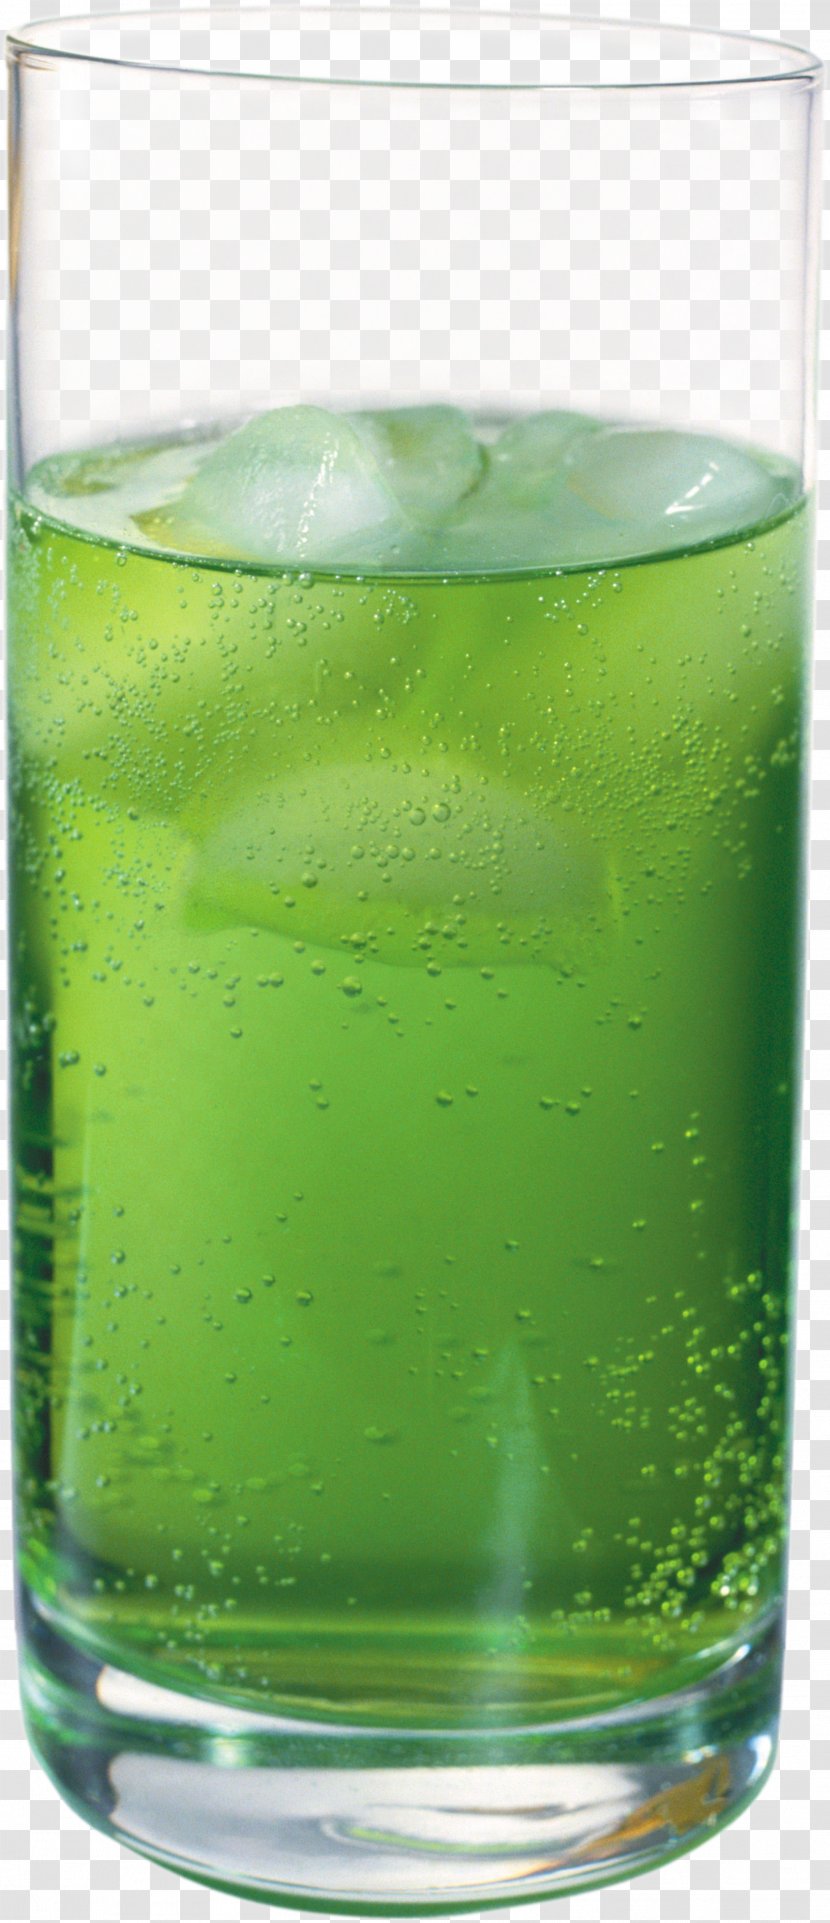 Fizzy Drinks Cocktail Juice Non-alcoholic Drink Lemon-lime - Grass Family Transparent PNG